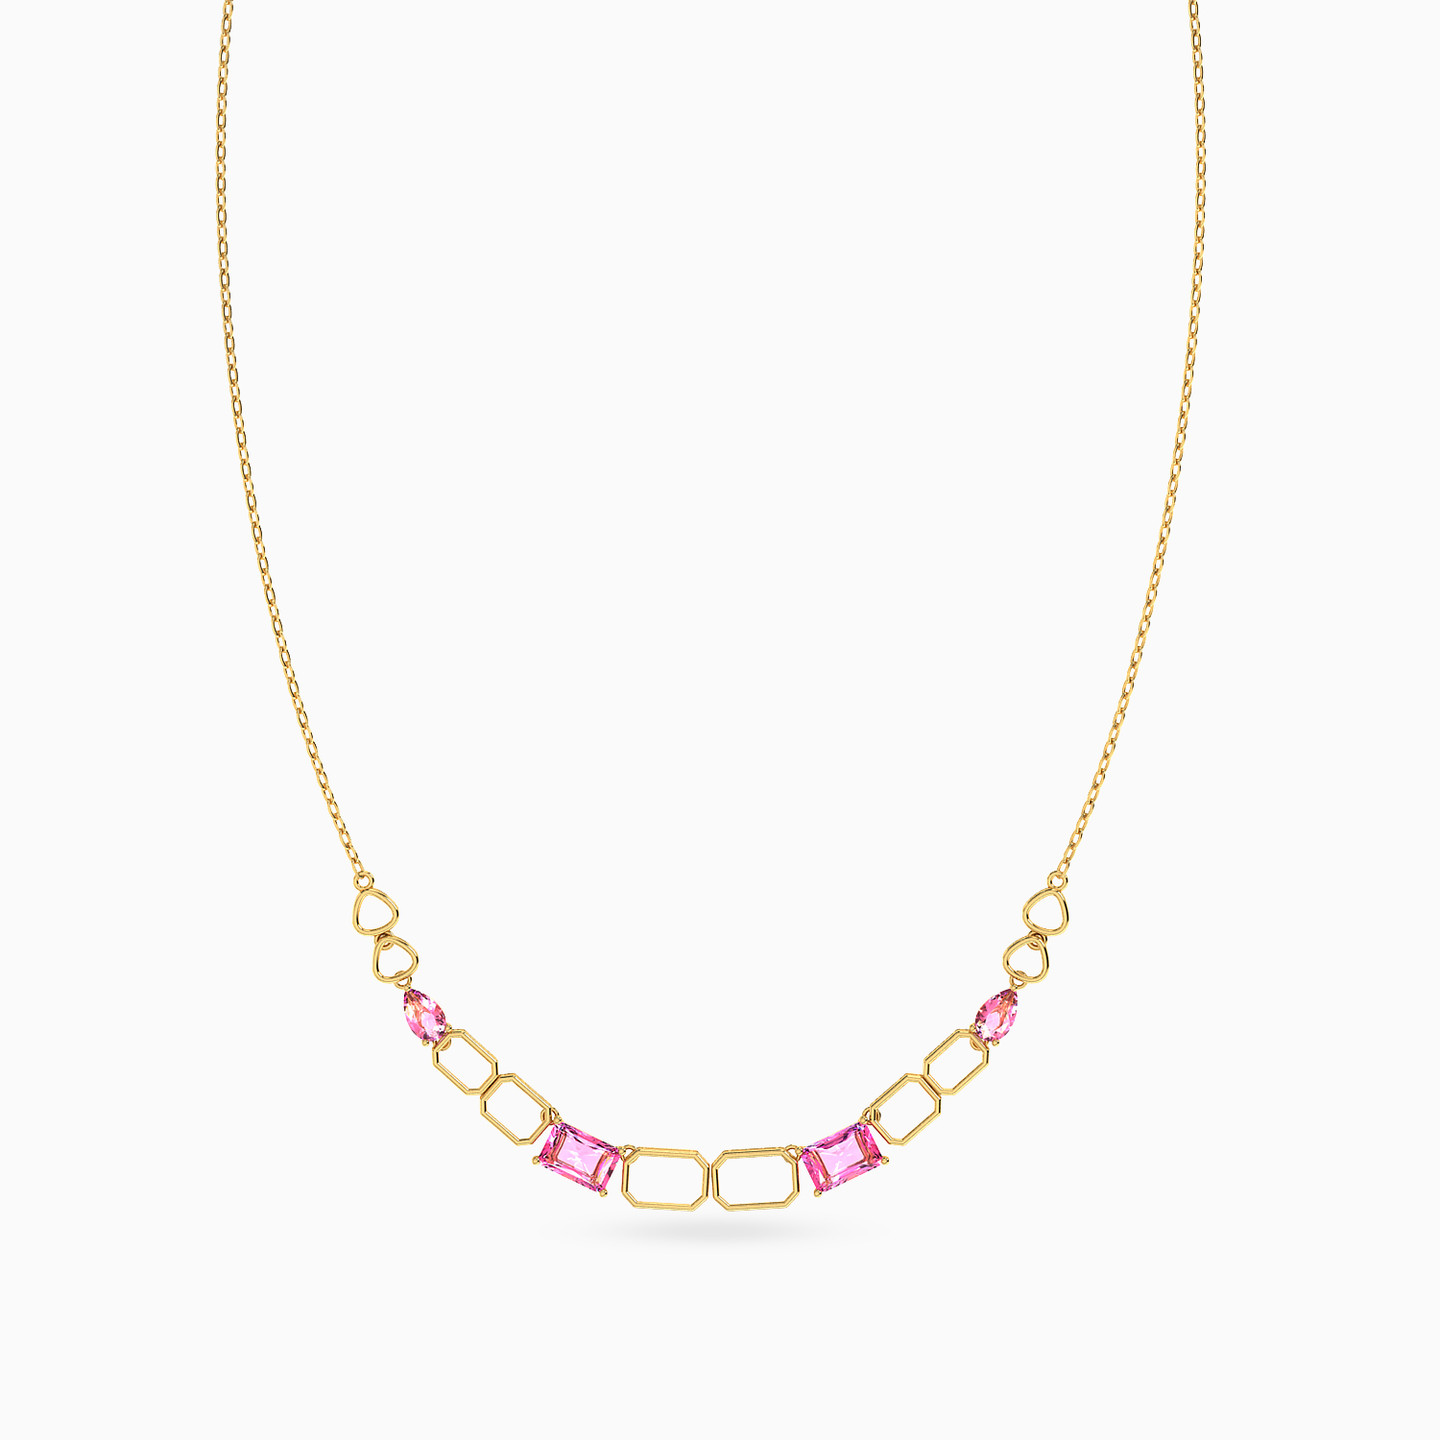 18K Gold Colored Stones Chain Necklace - 3